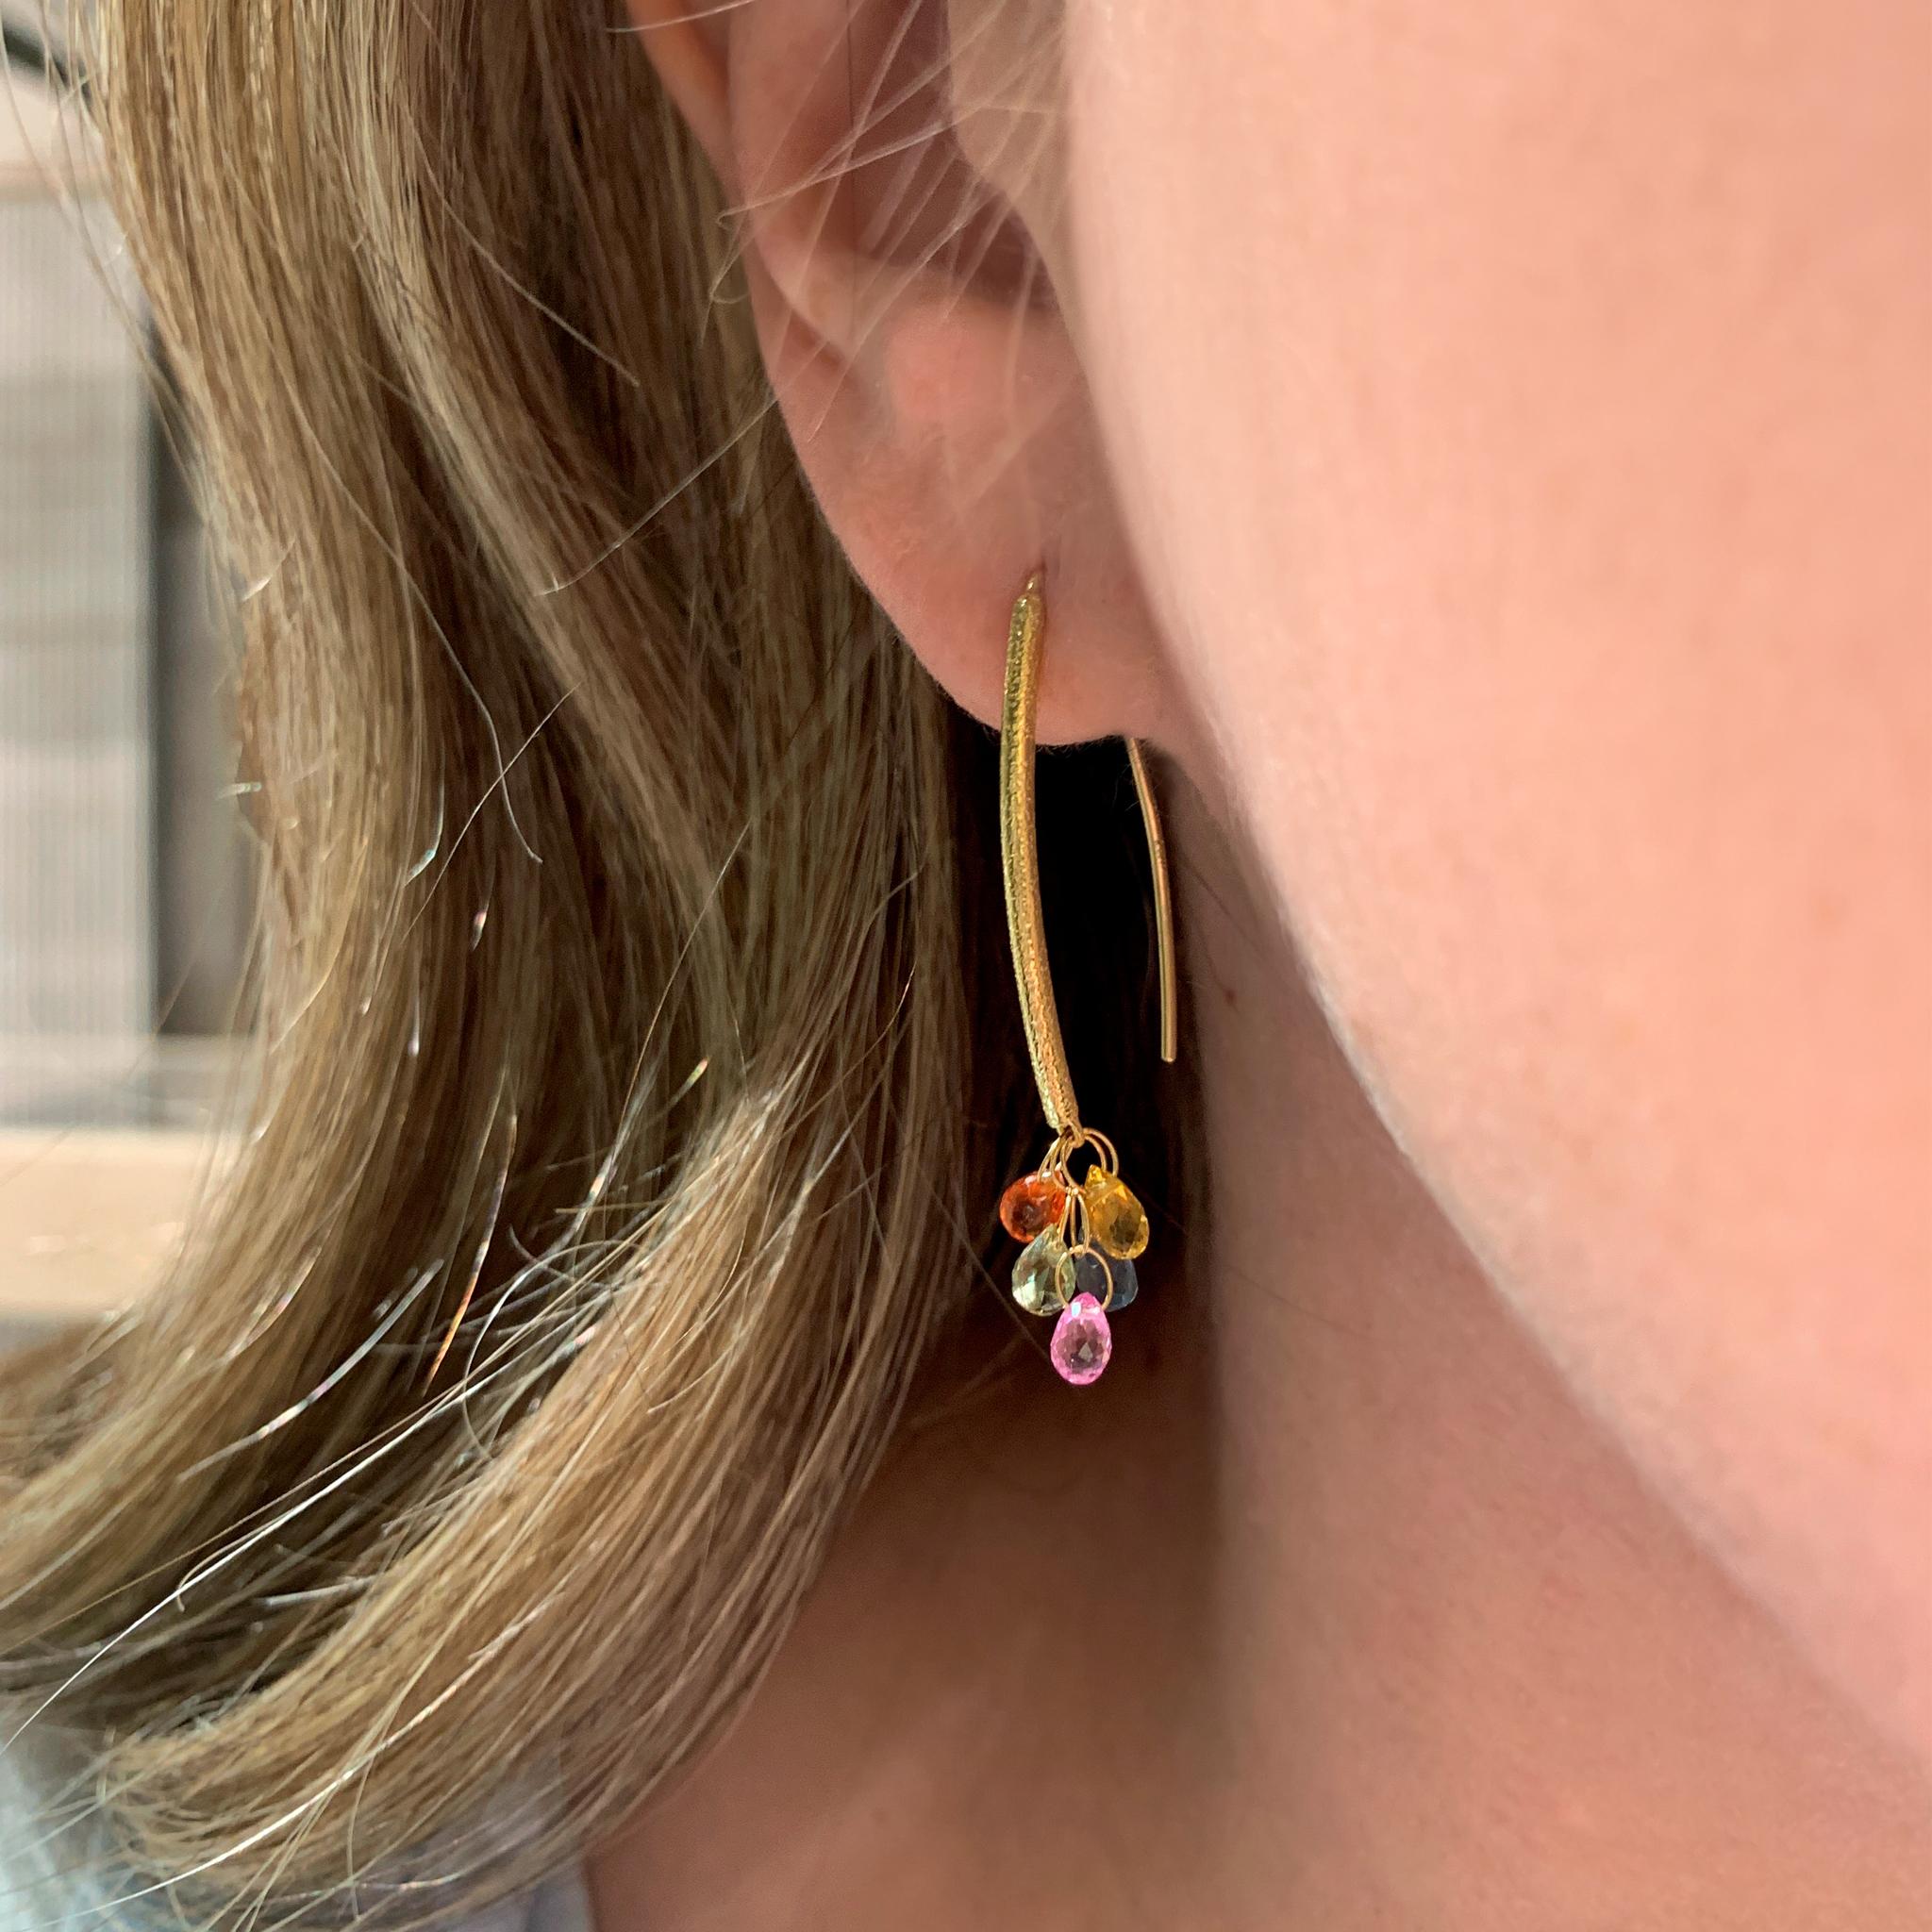 Navette Wire Dangle Earrings Earrings hand-fabricated by acclaimed, award-winning jewelry maker Barbara Heinrich in her signature-finished 18k yellow gold featuring 3.22 total carats of perfectly-matched blue, pink, green, yellow, and orange